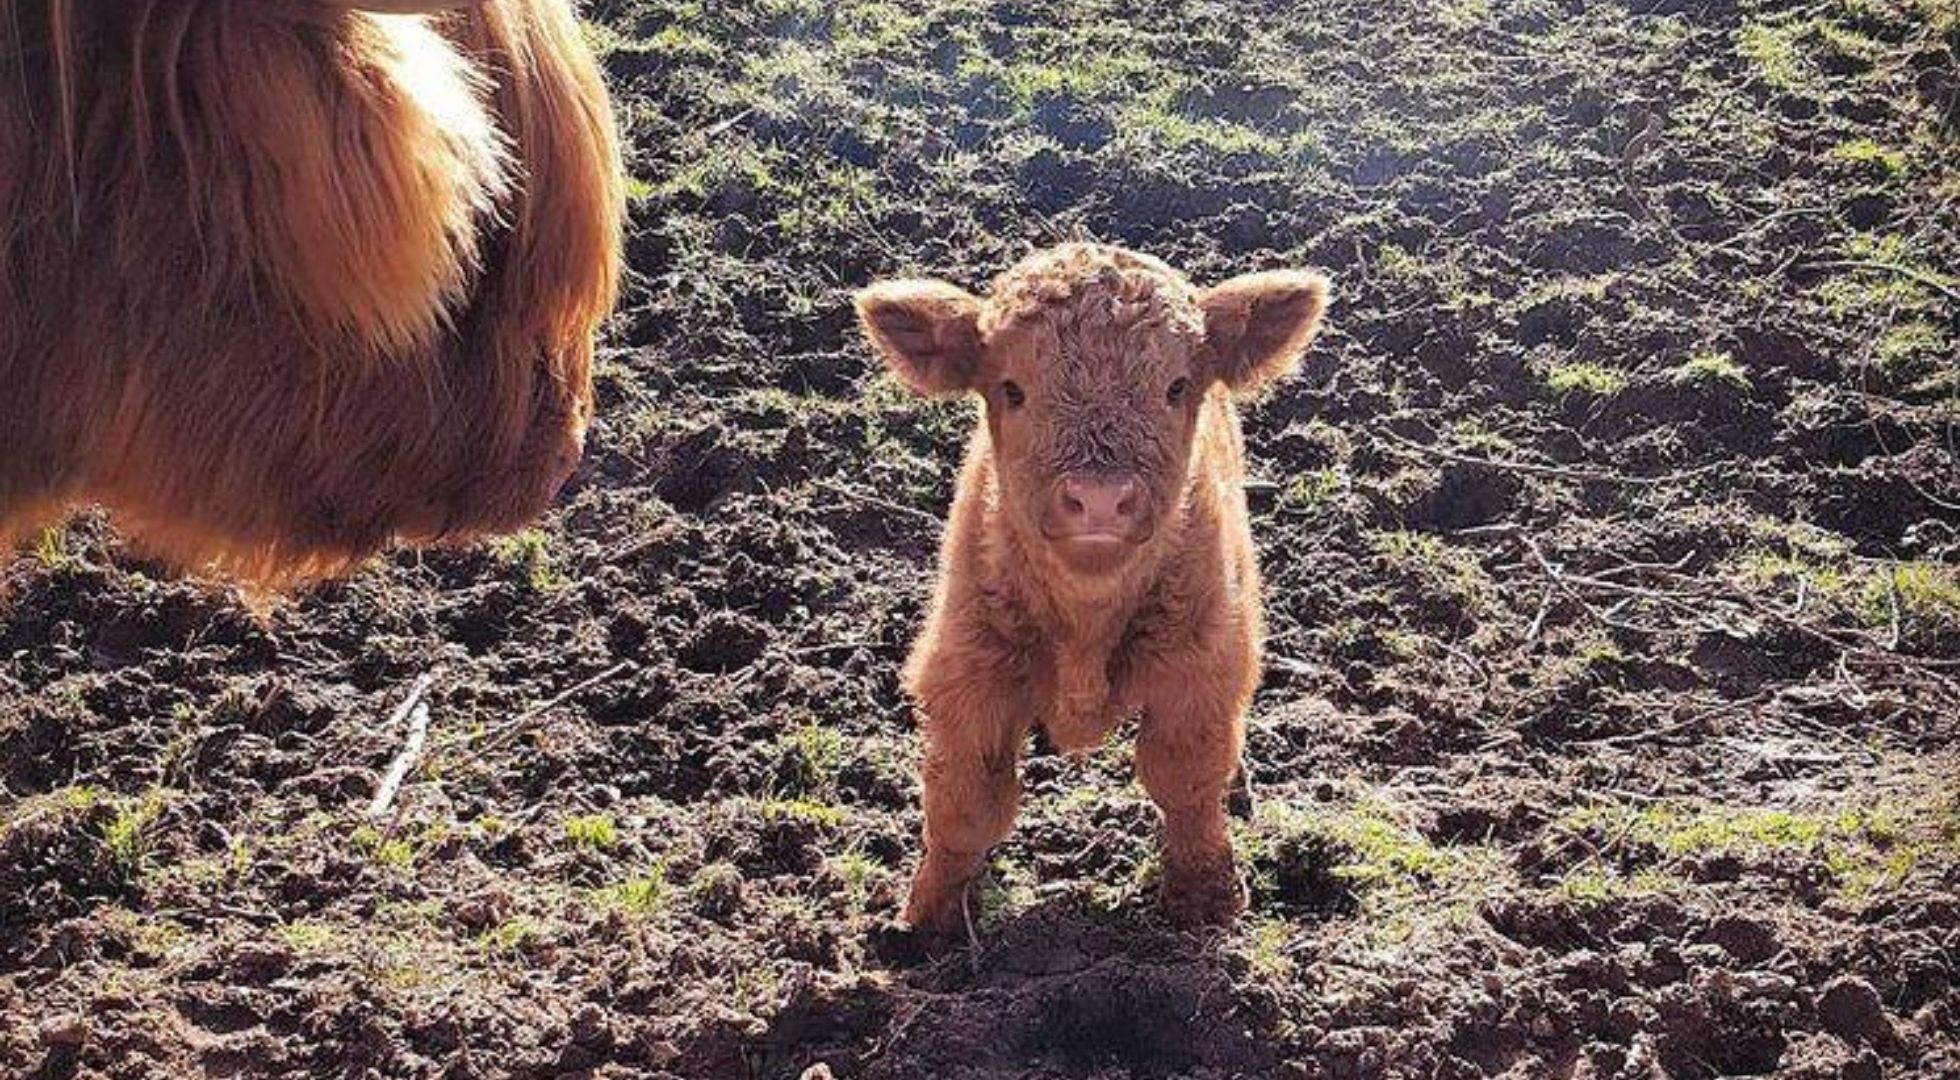 Just a baby coo